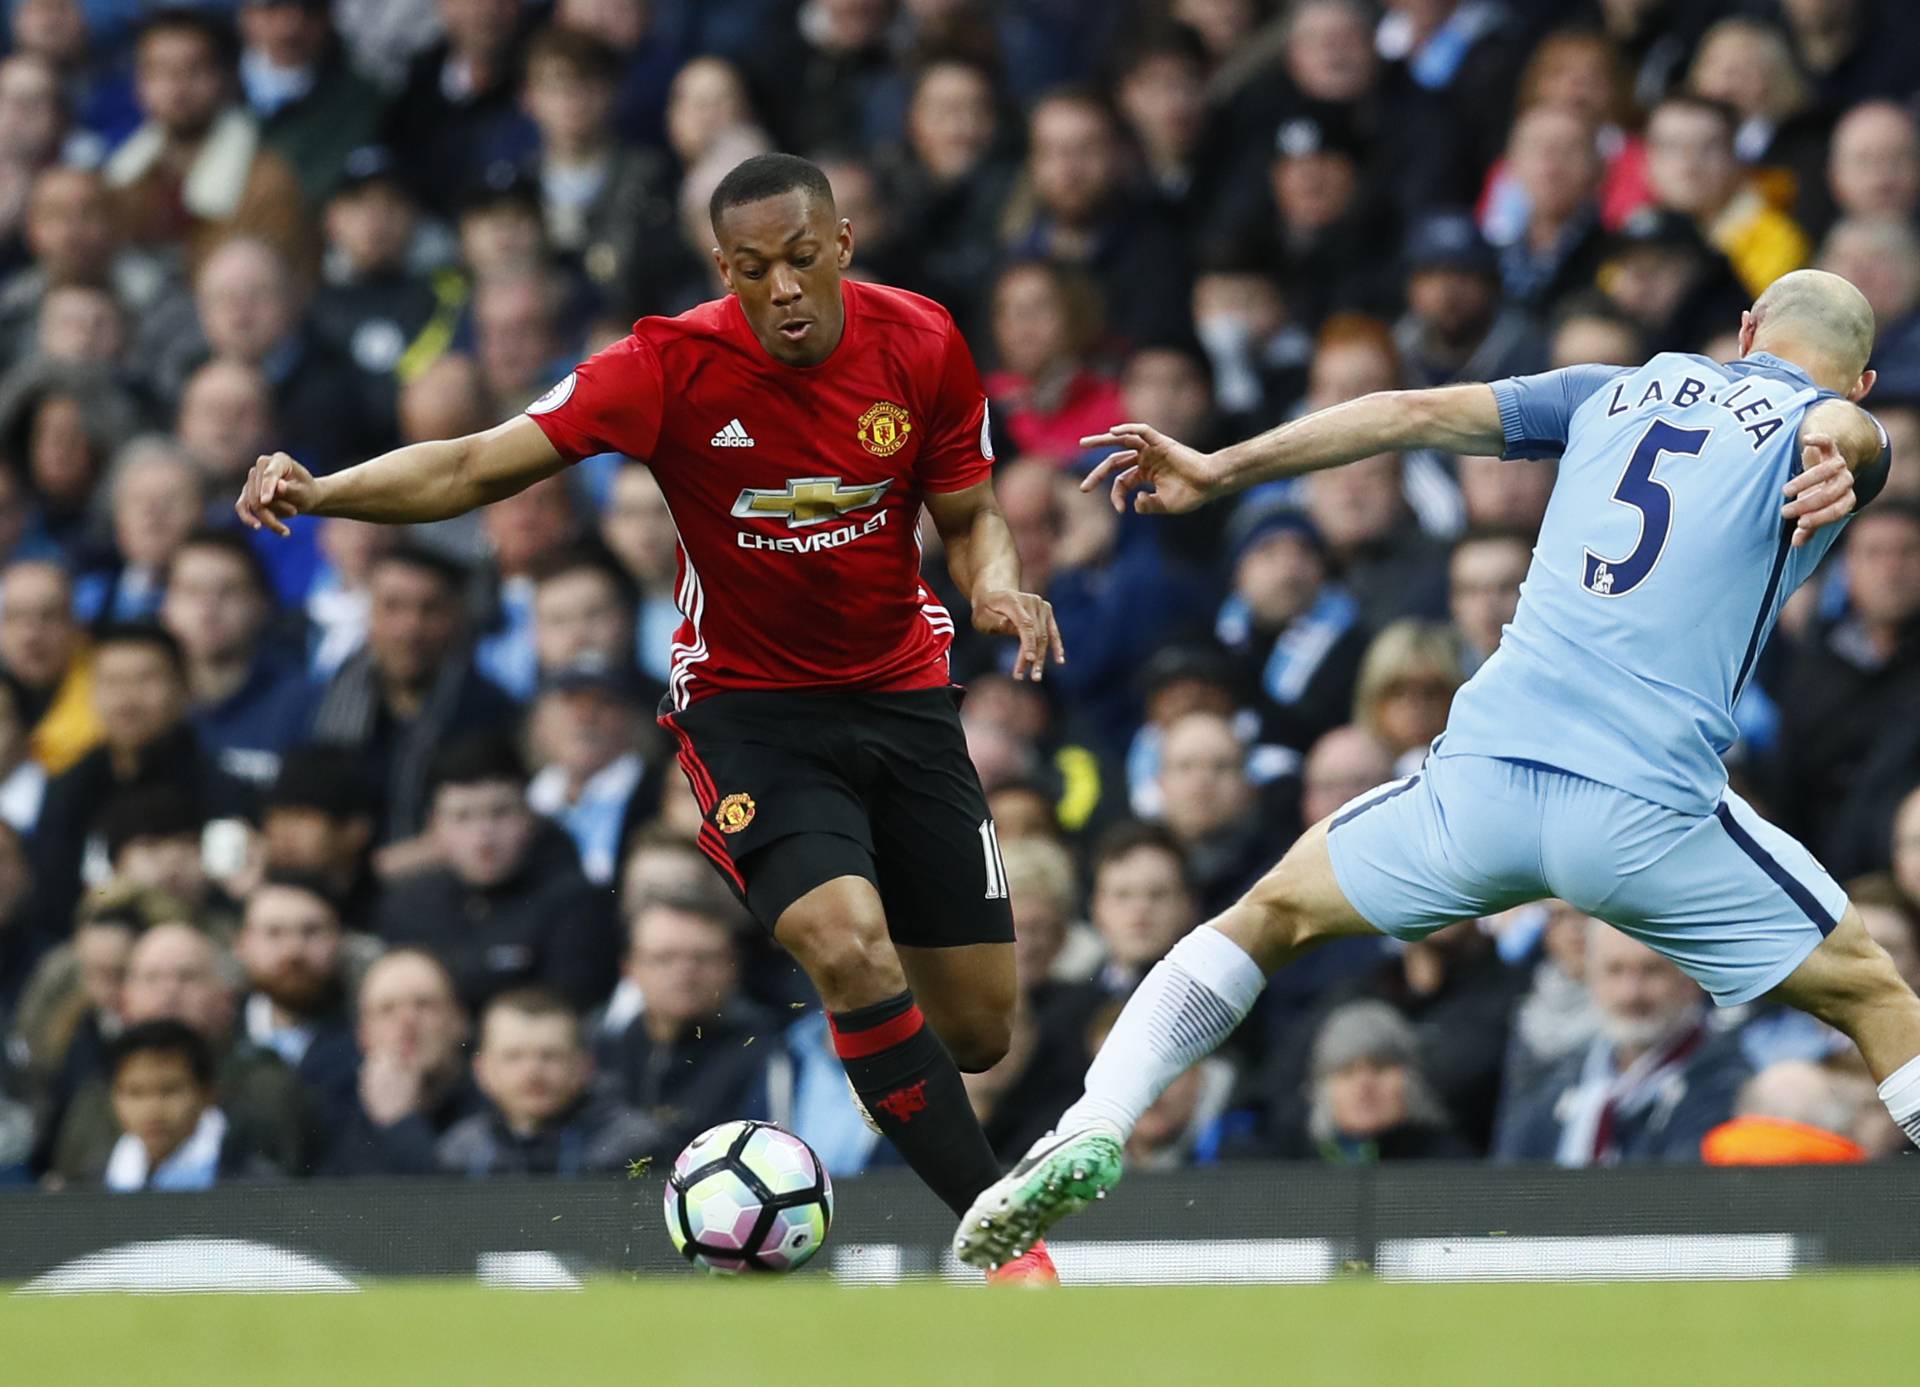 Manchester United's Anthony Martial in action with Manchester City's Pablo Zabaleta